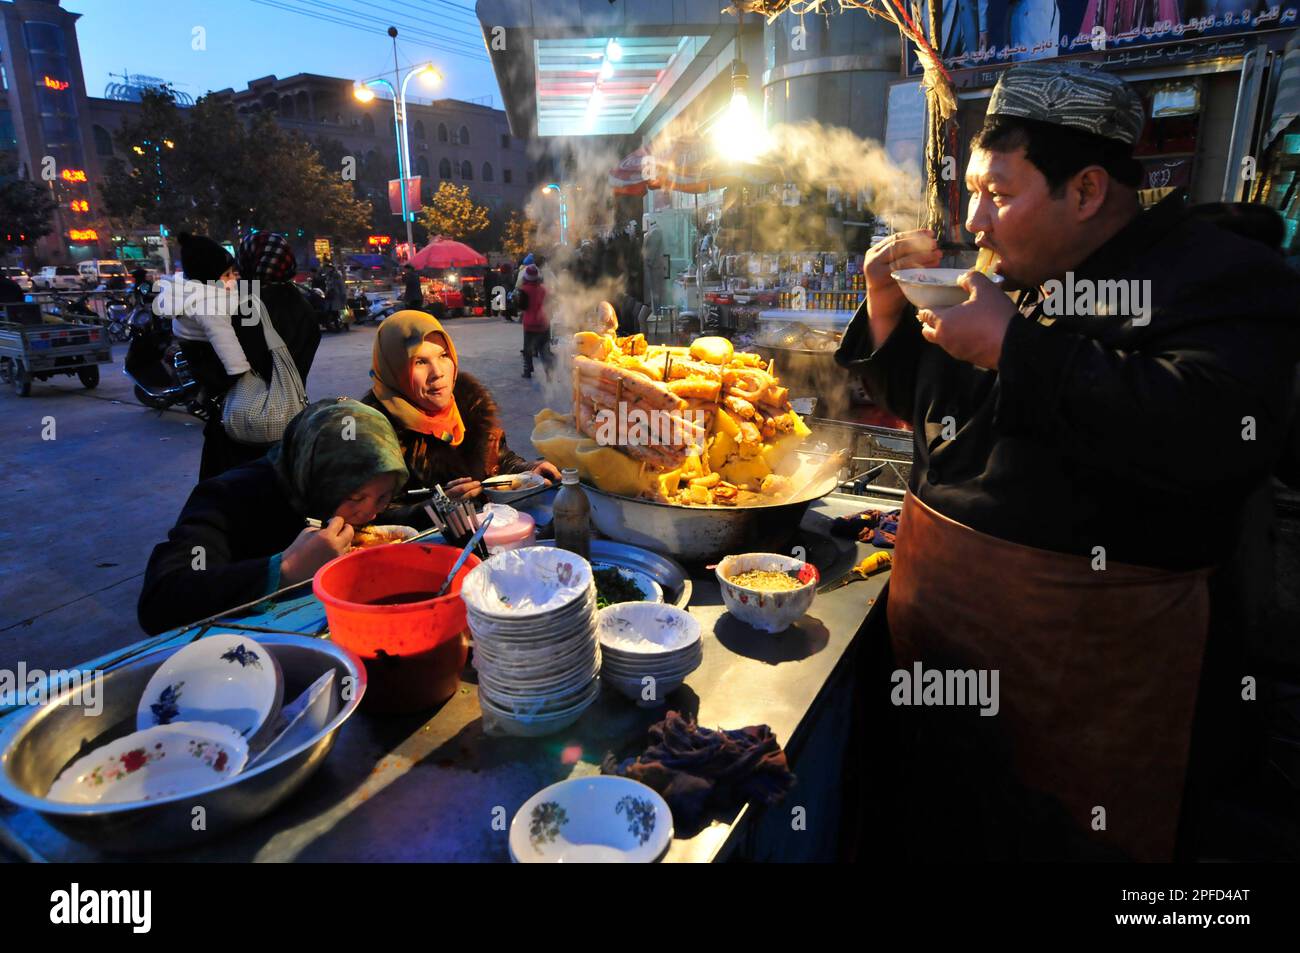 A Laghman food stall in the old city of Kashgar, China. Stock Photo